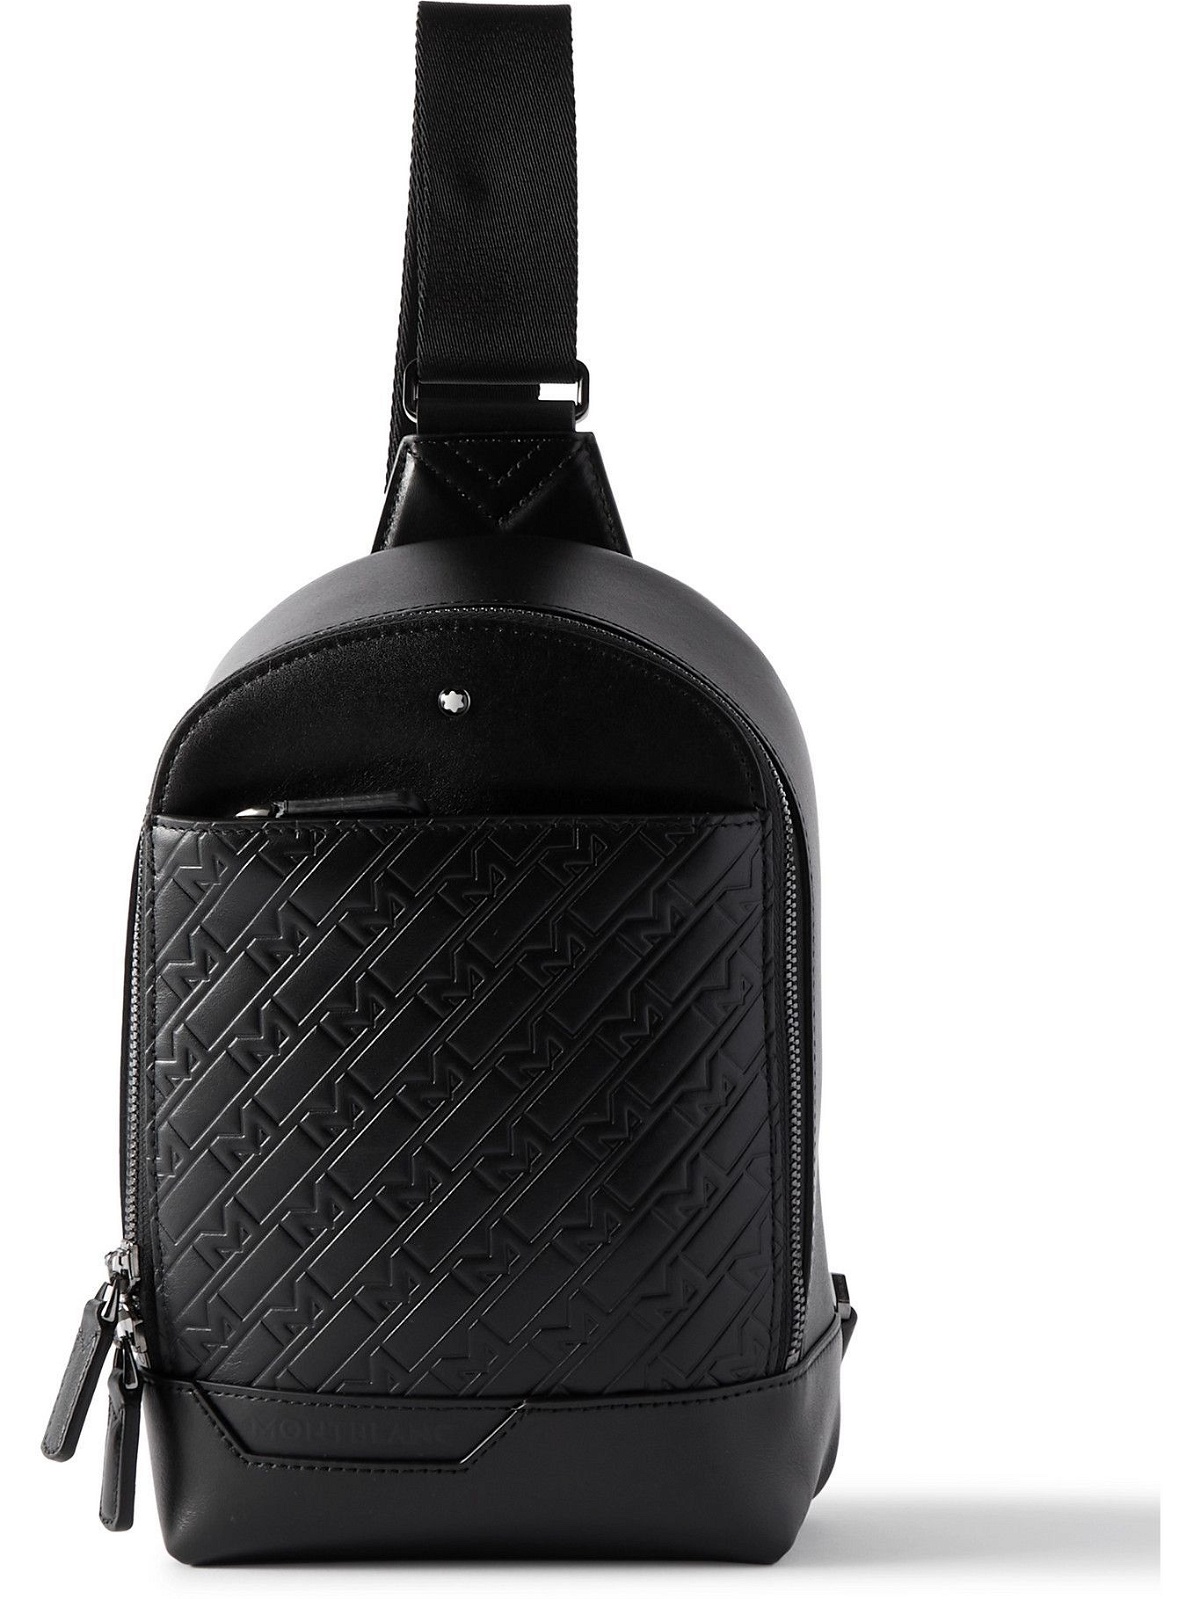 Montblanc Meisterstück 4810 Small Backpack